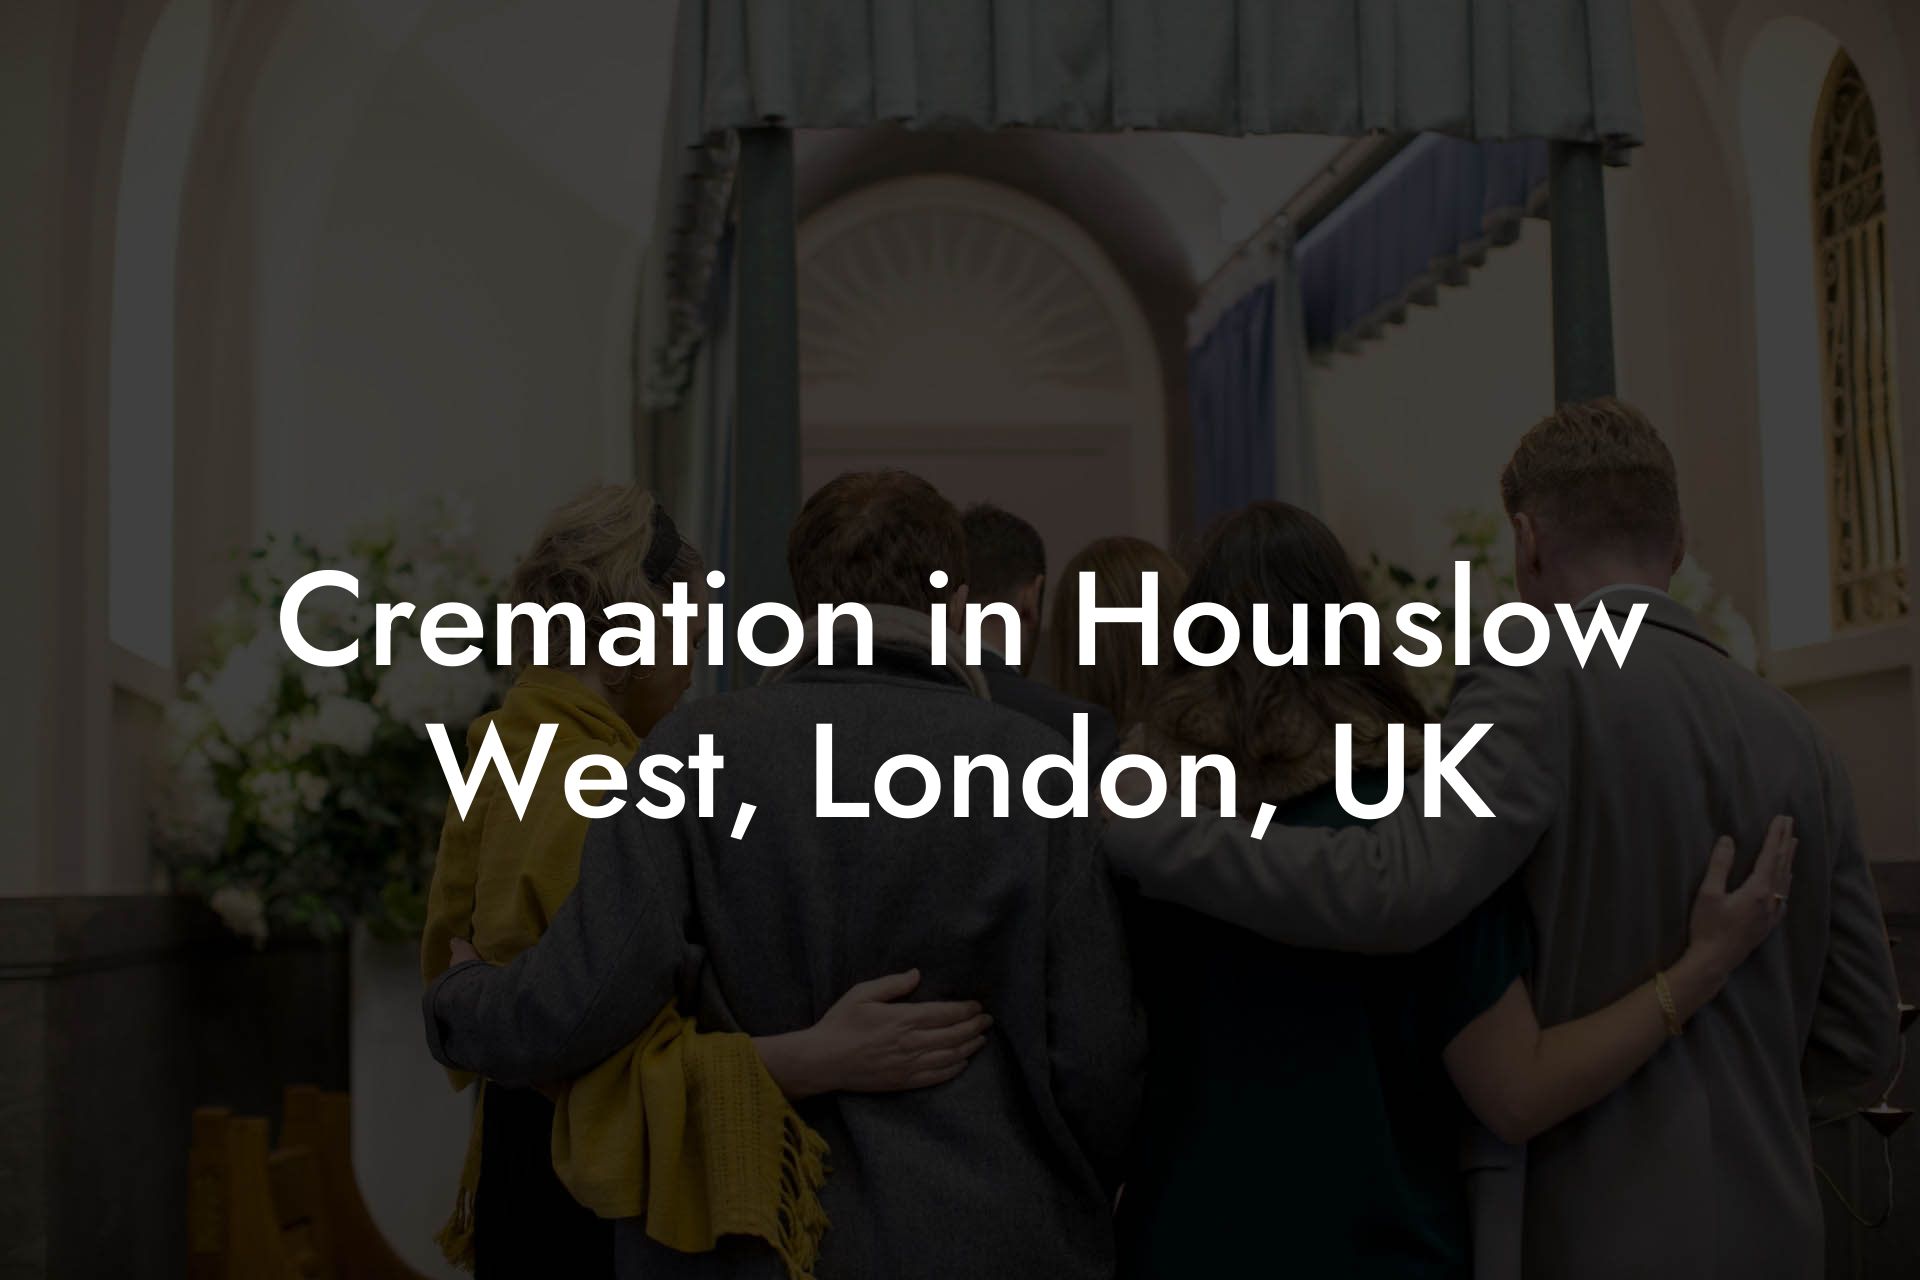 Cremation in Hounslow West, London, UK